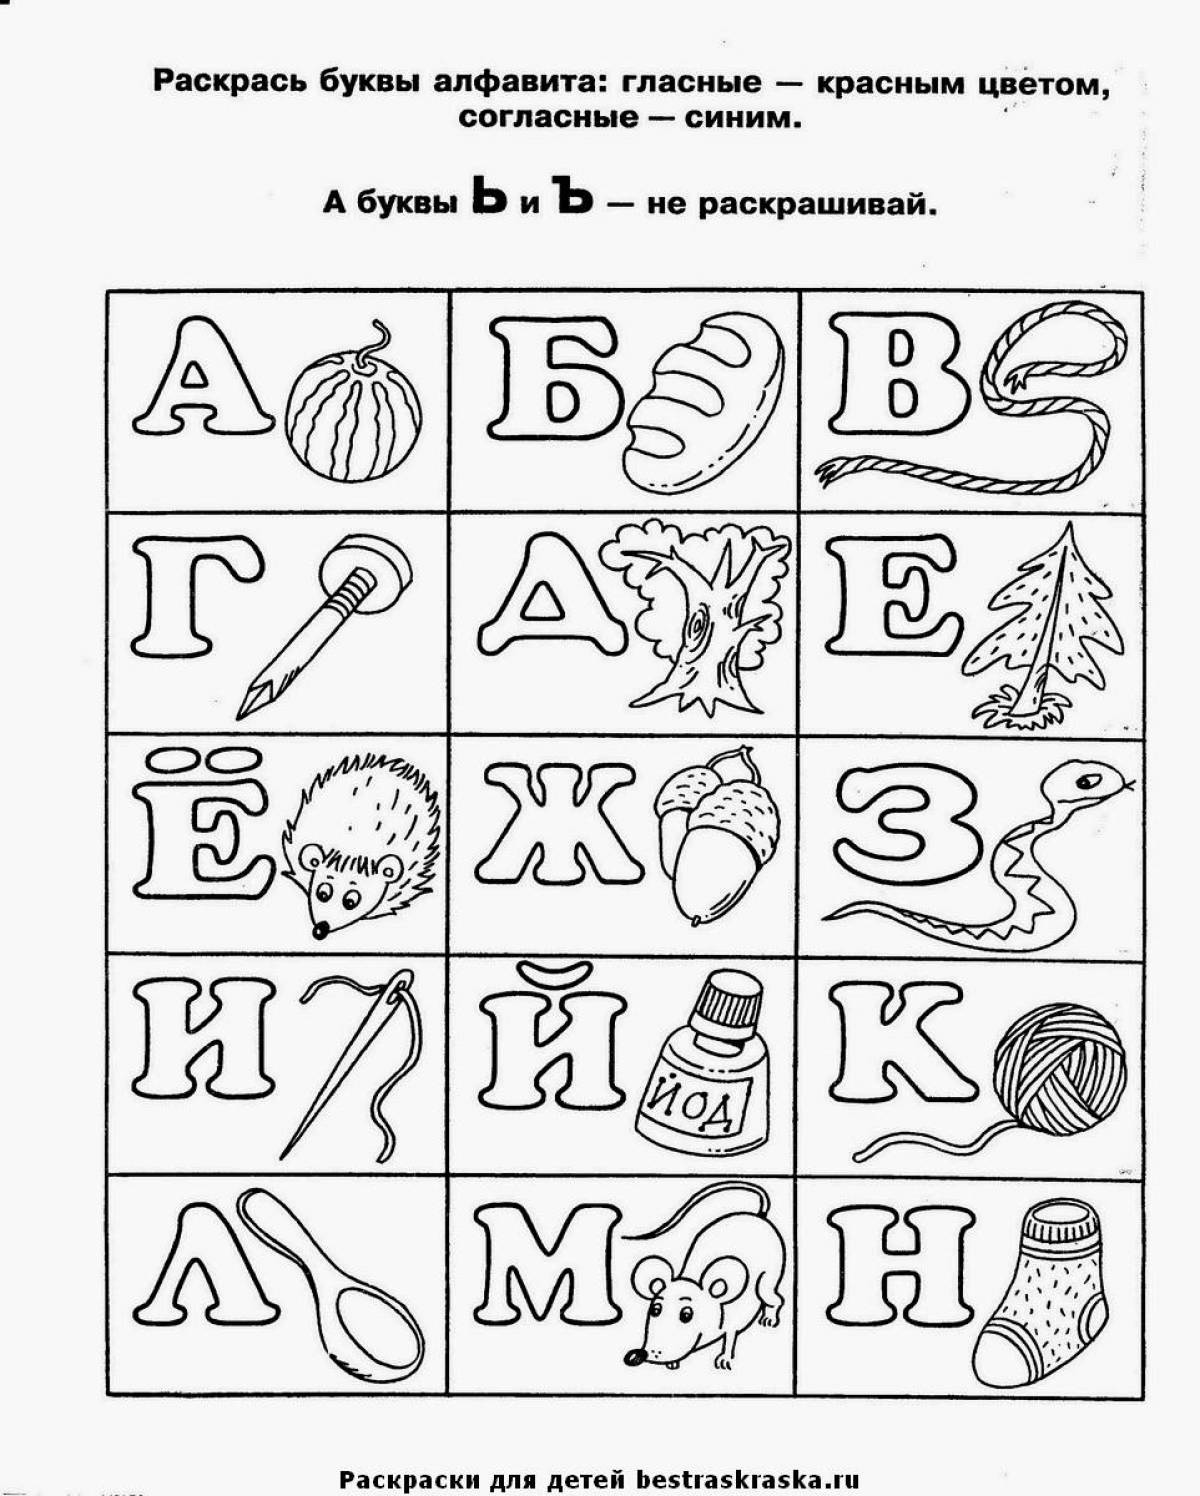 Amazing alphabet knowledge coloring page